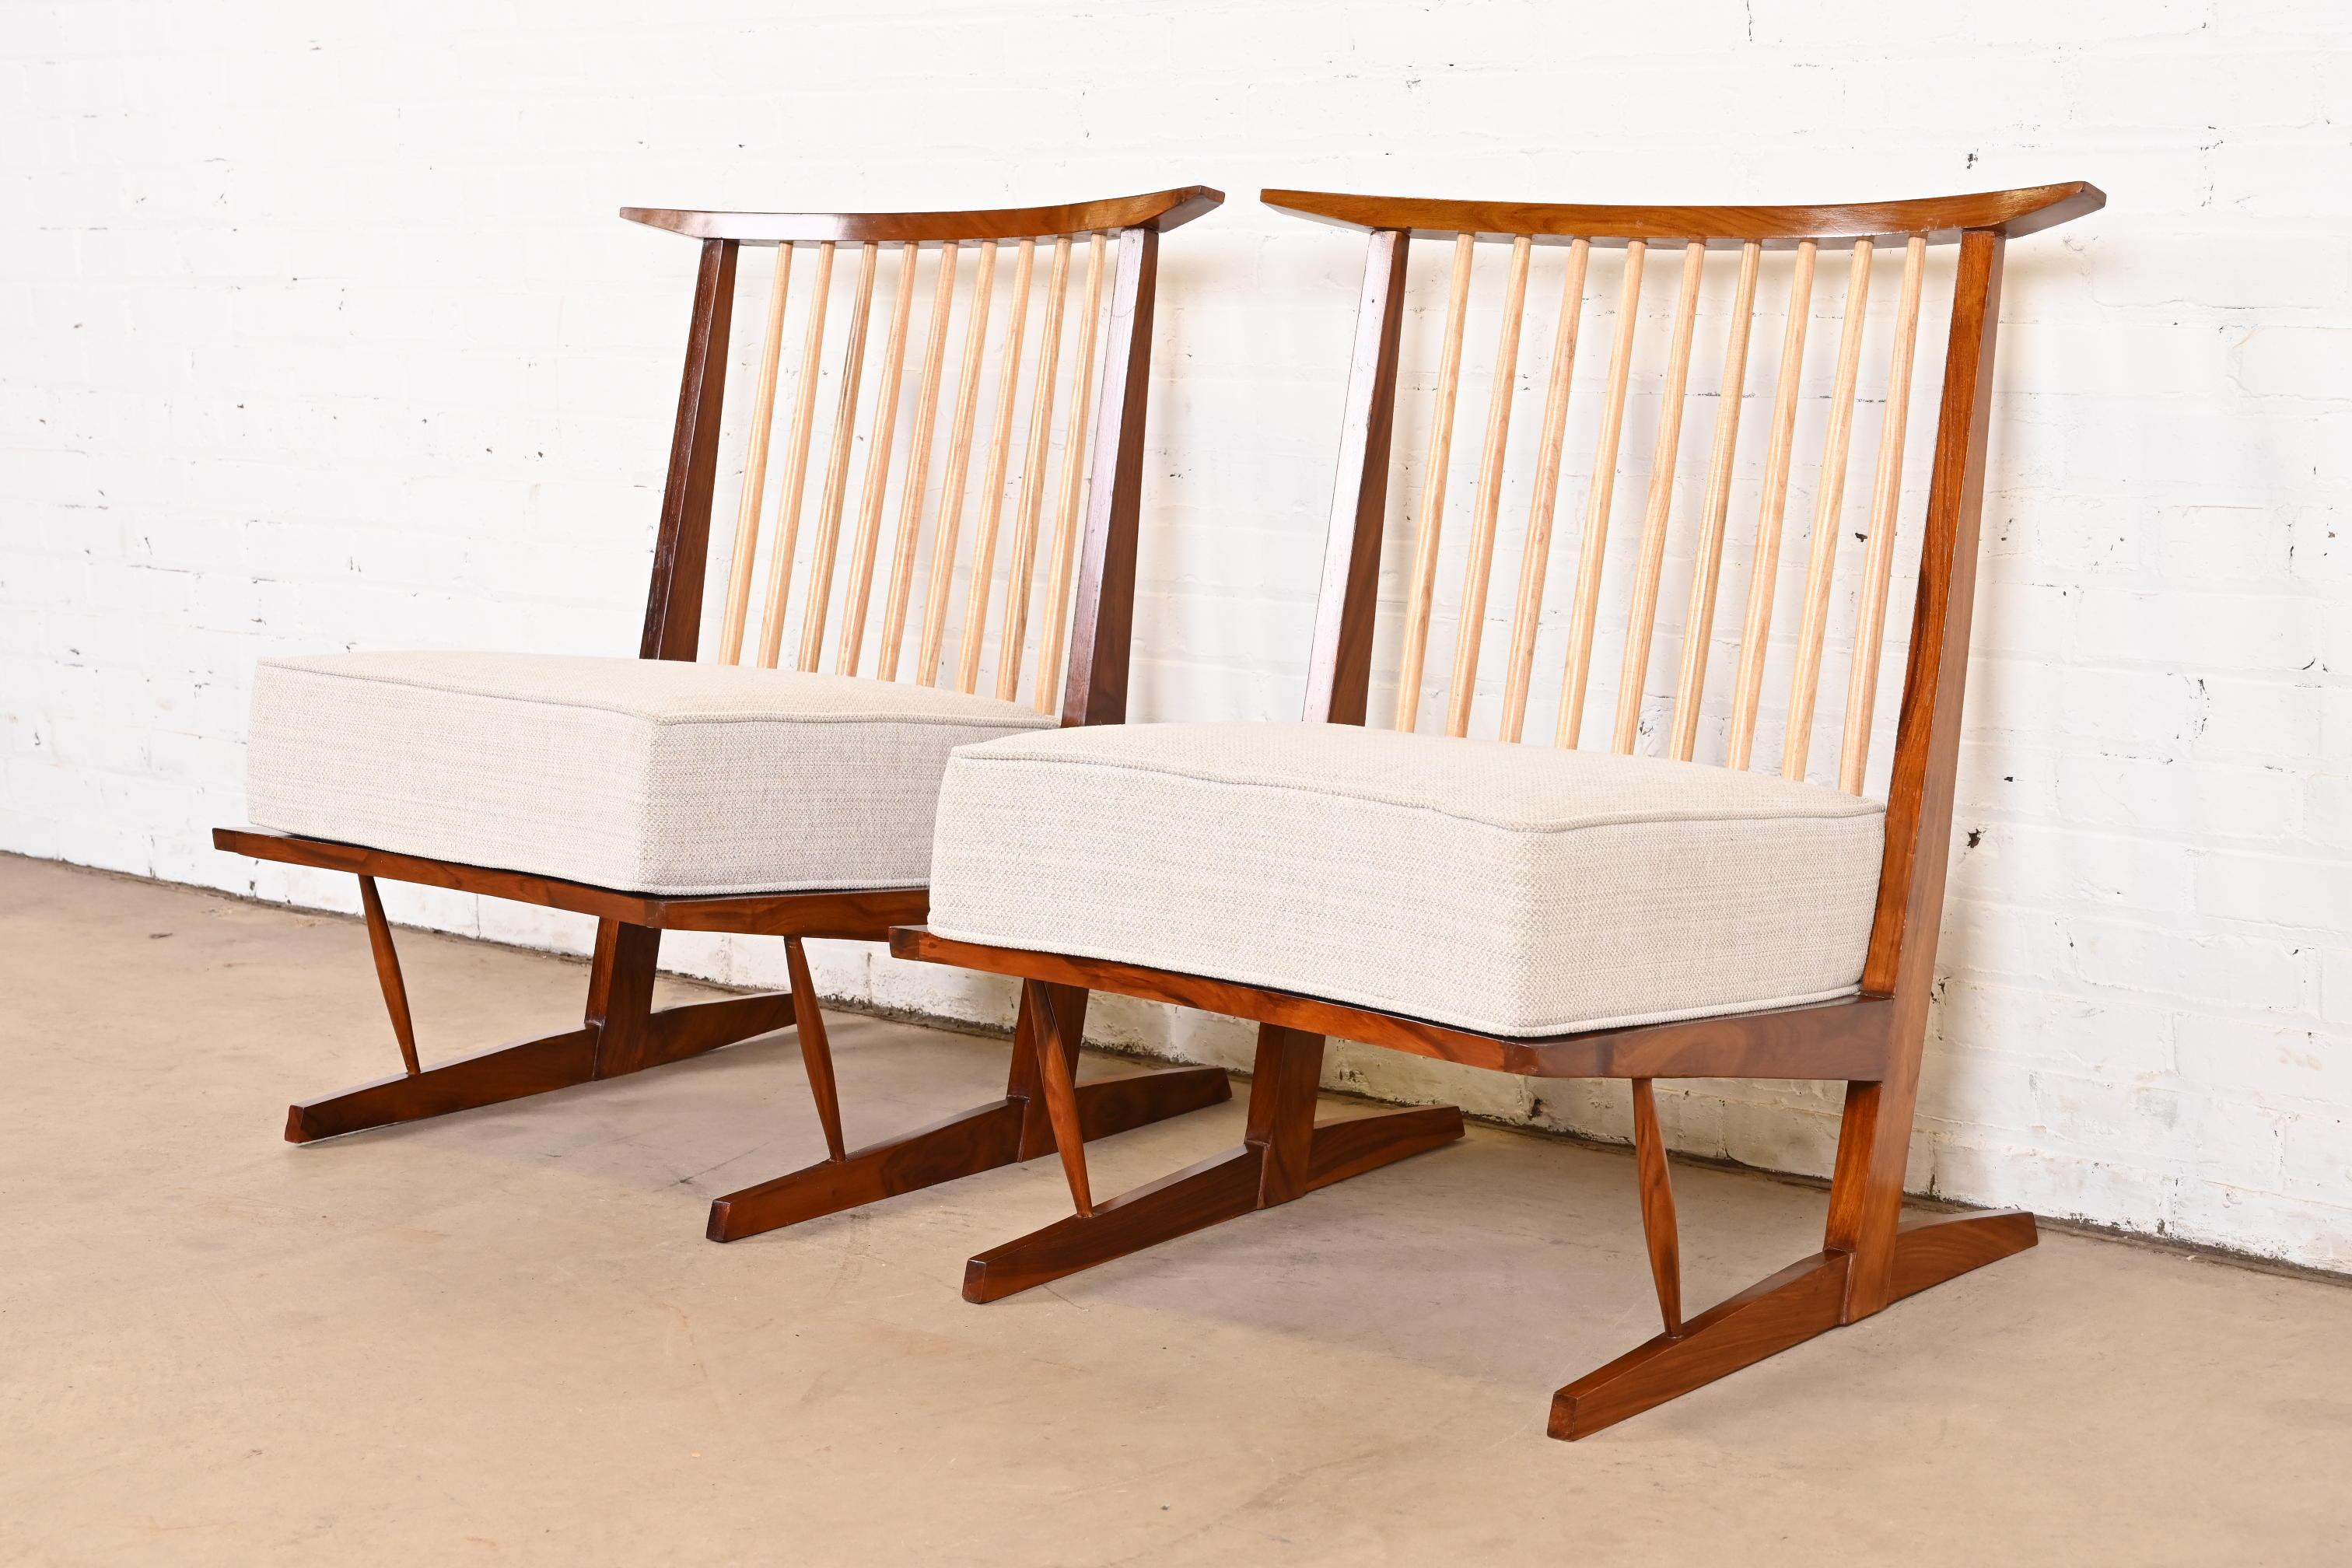 An exceptional pair of Organic Modern lounge chairs

After George Nakashima

USA, Circa Late 20th Century

Sculpted walnut frame, with contrasting hickory spindles, and removable upholstered seat cushion.

Measures: 23.25